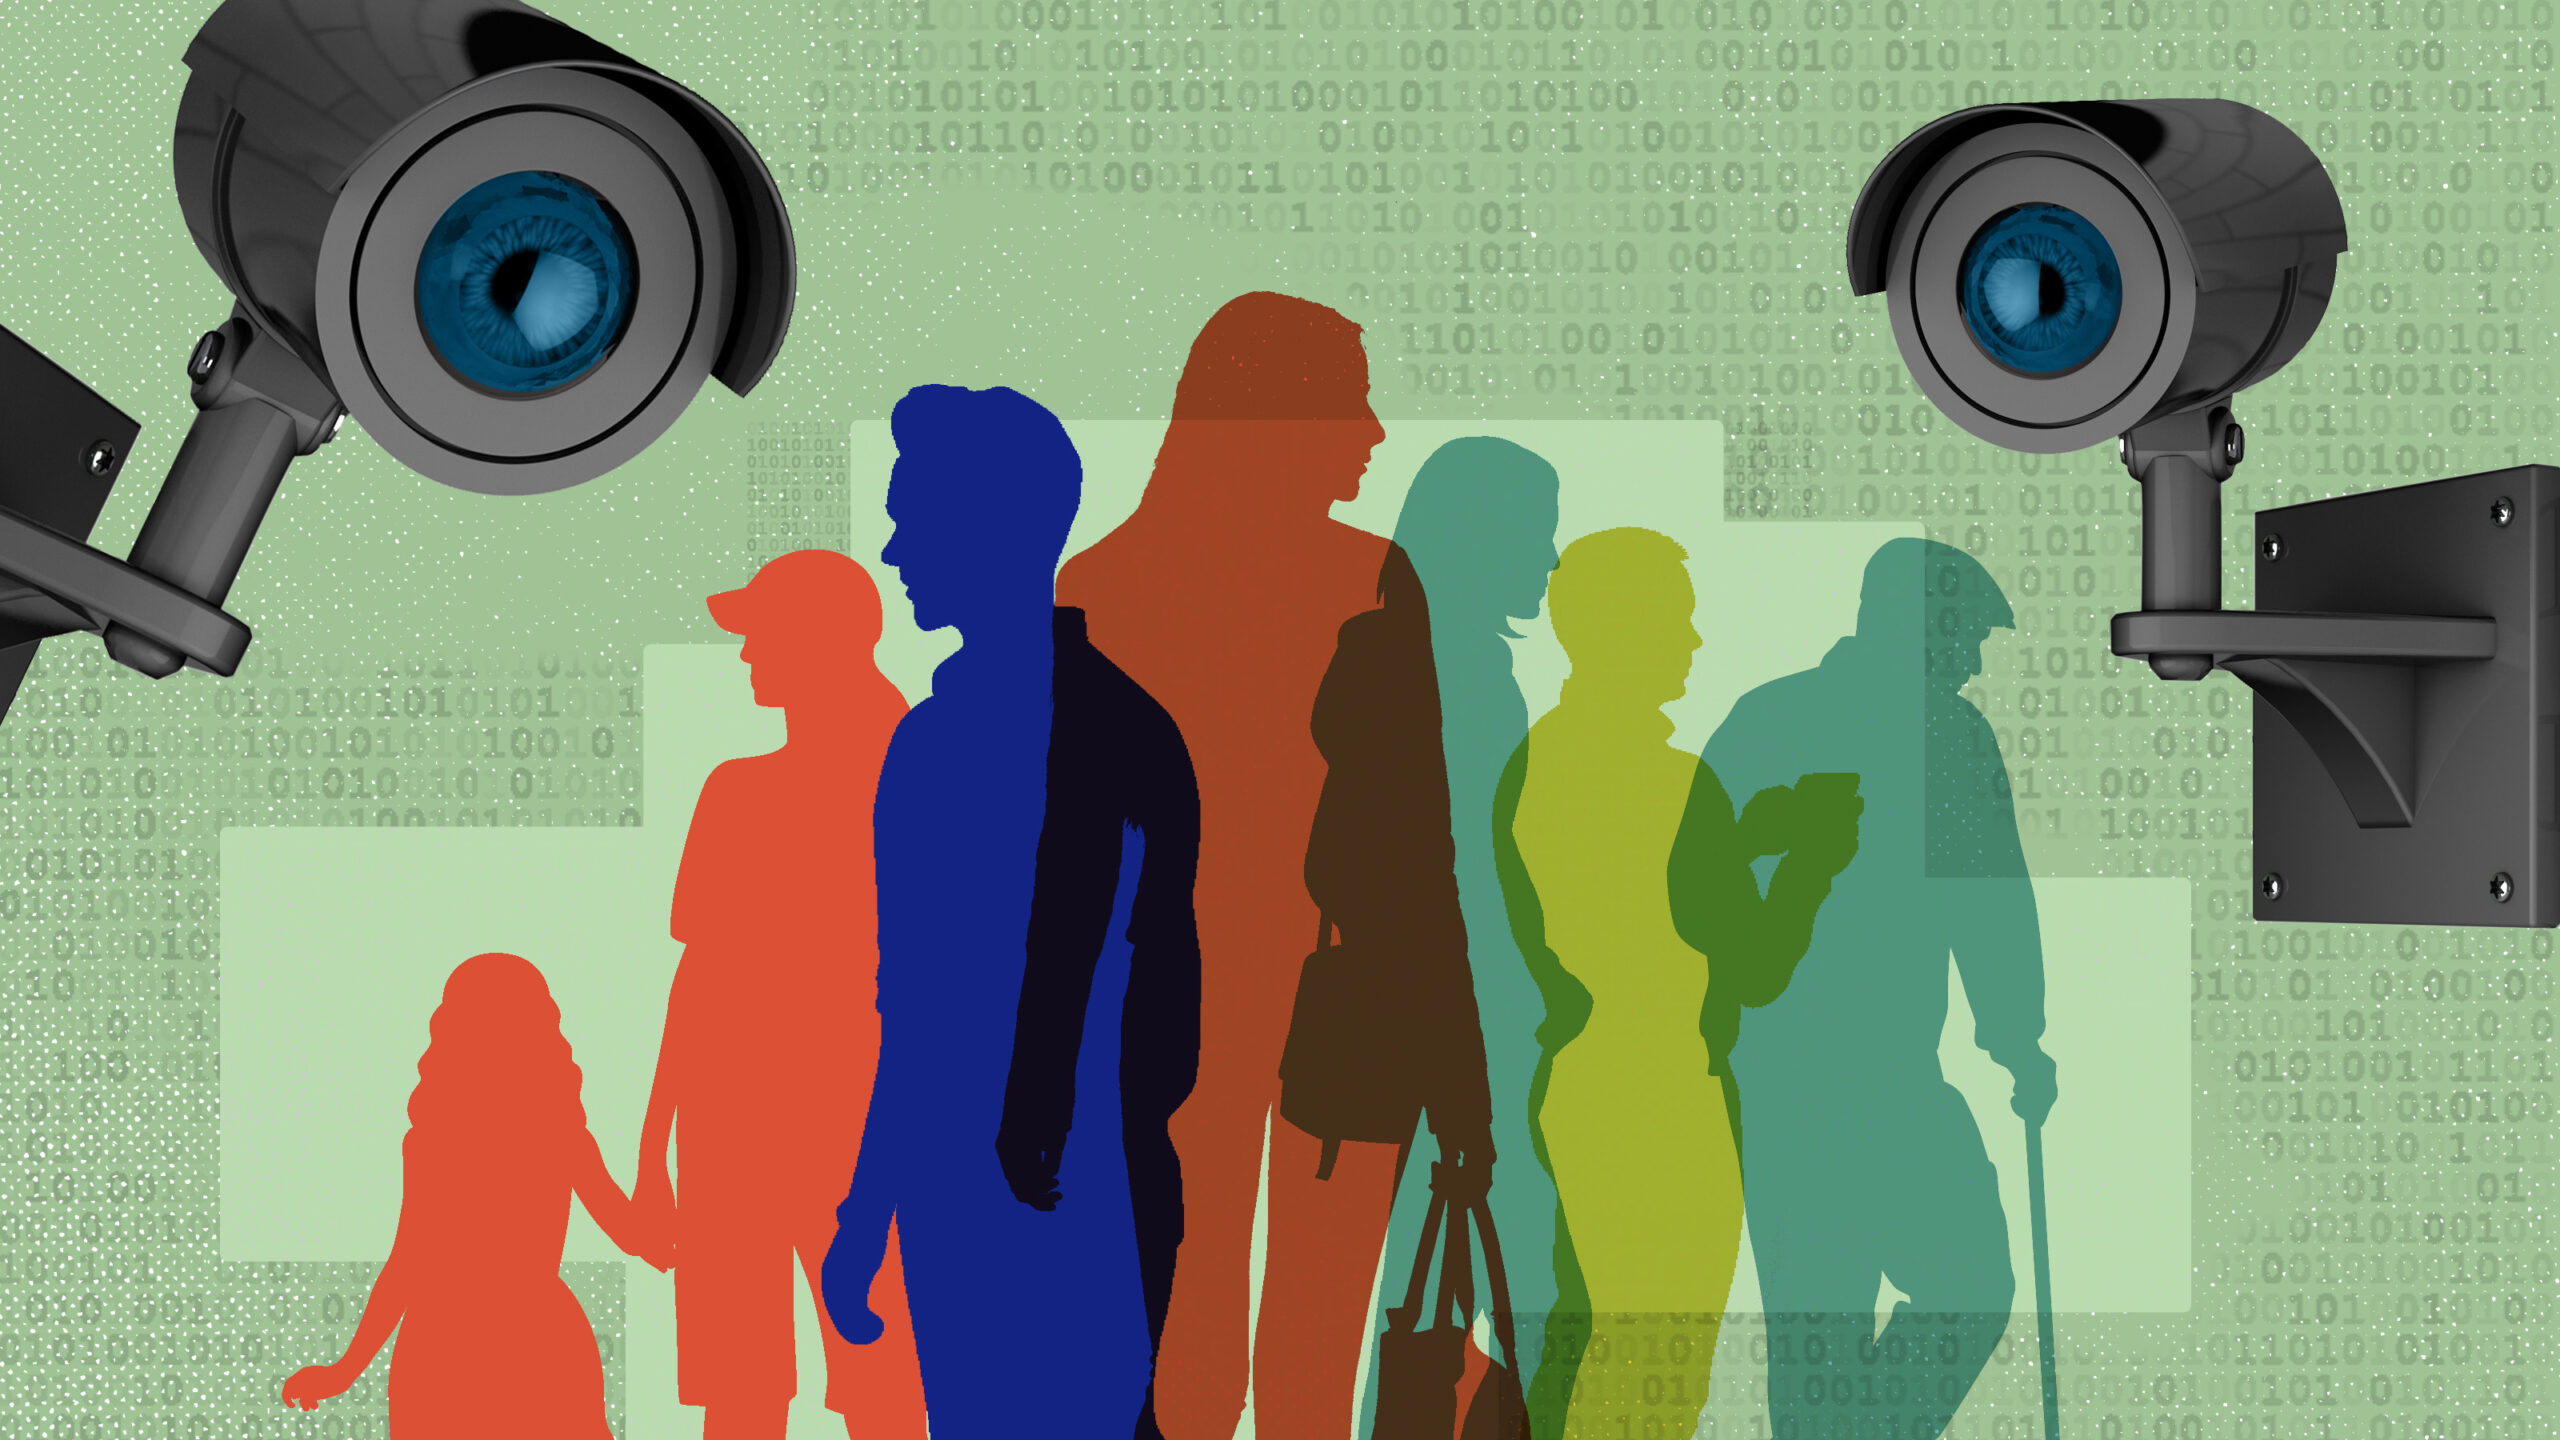 An illustration depicting two surveillance cameras observing people from various age groups